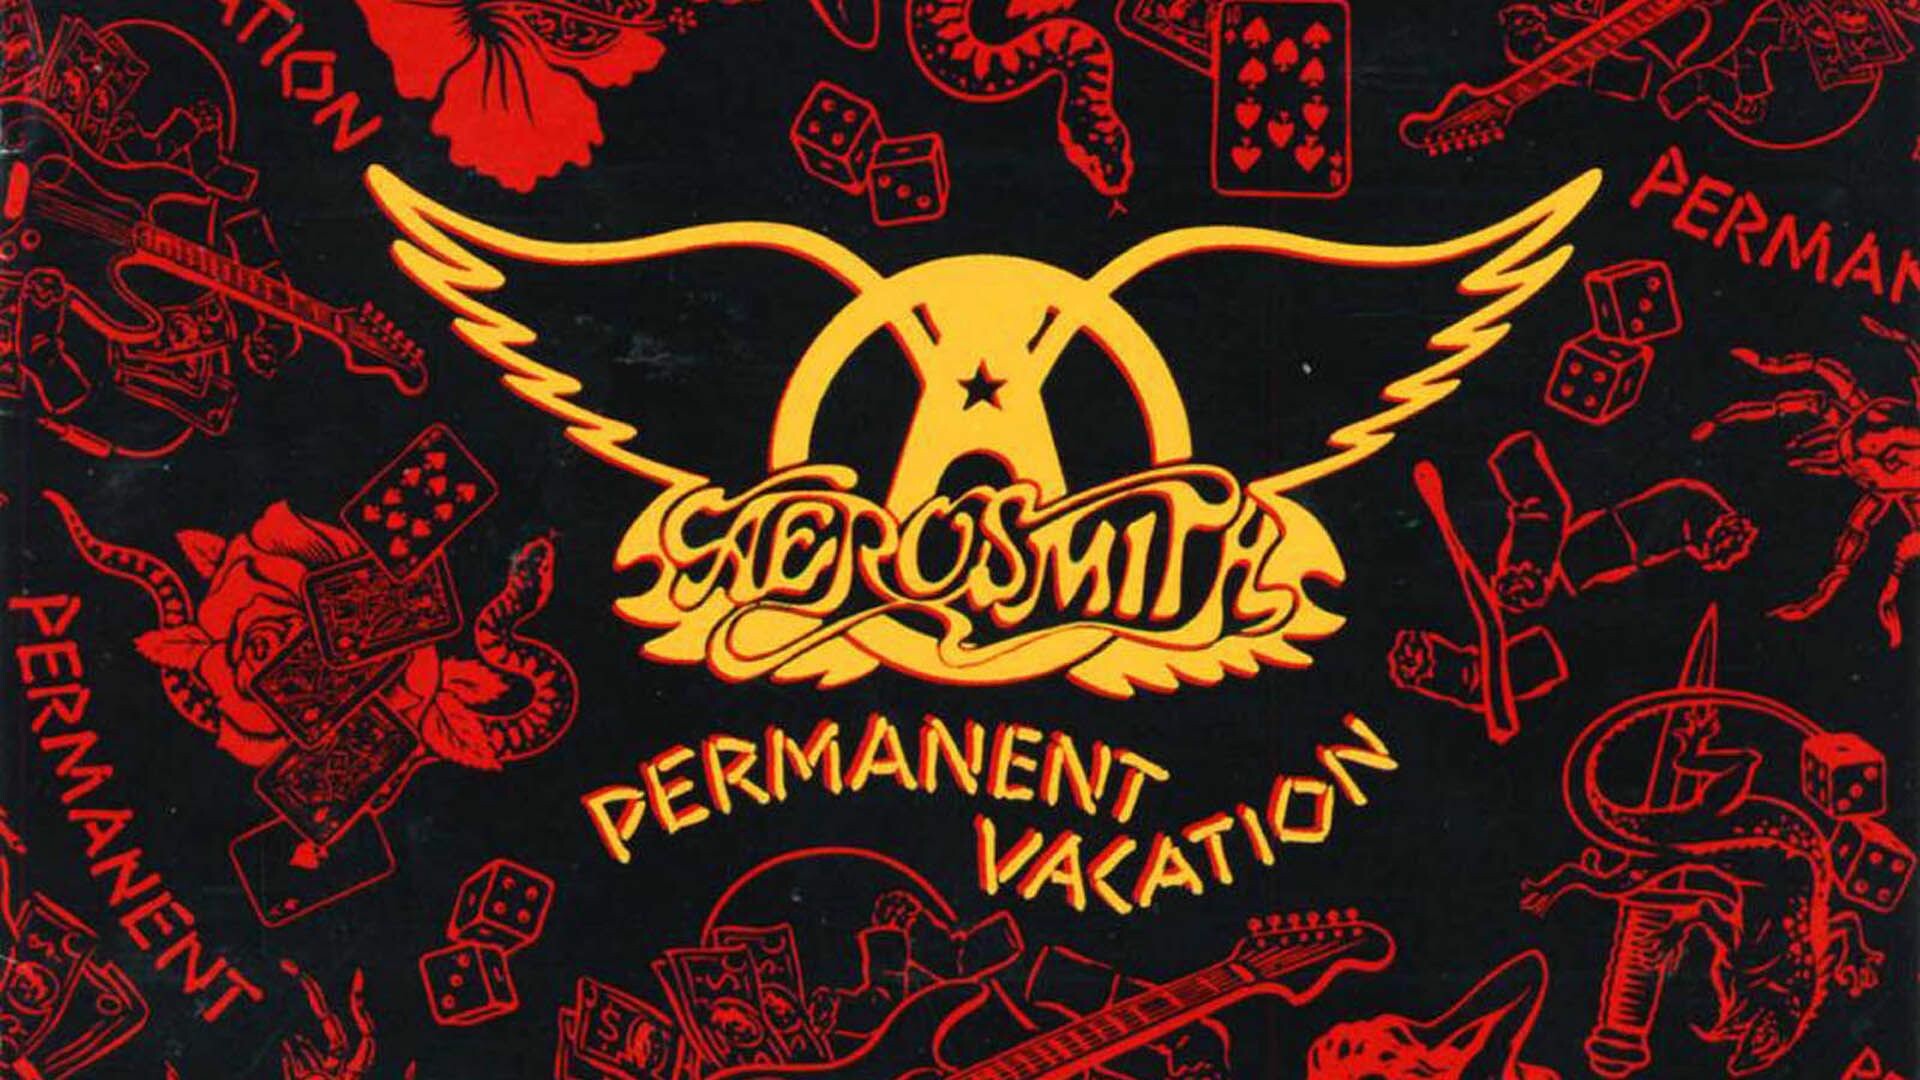 Aerosmith: Permanent Vacation has sold over five million copies in the US. 1920x1080 Full HD Wallpaper.